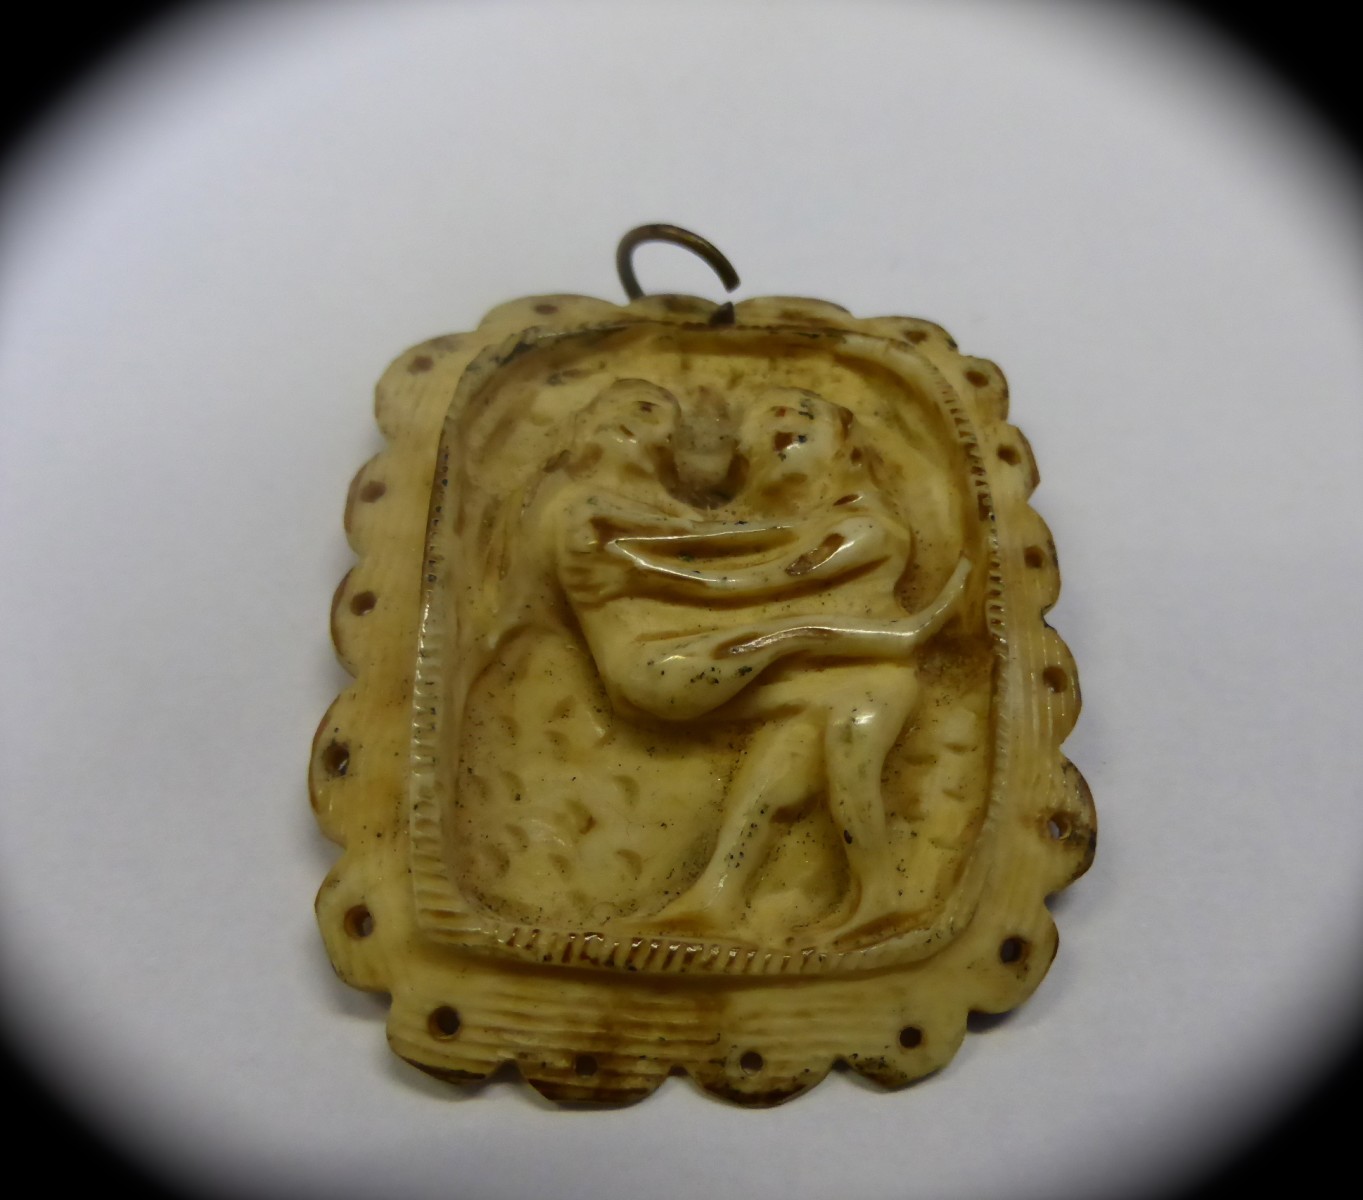 Antique Ivory Pendant, depicting scenes from the Karma Sutra, believed to be worn by Concubines in